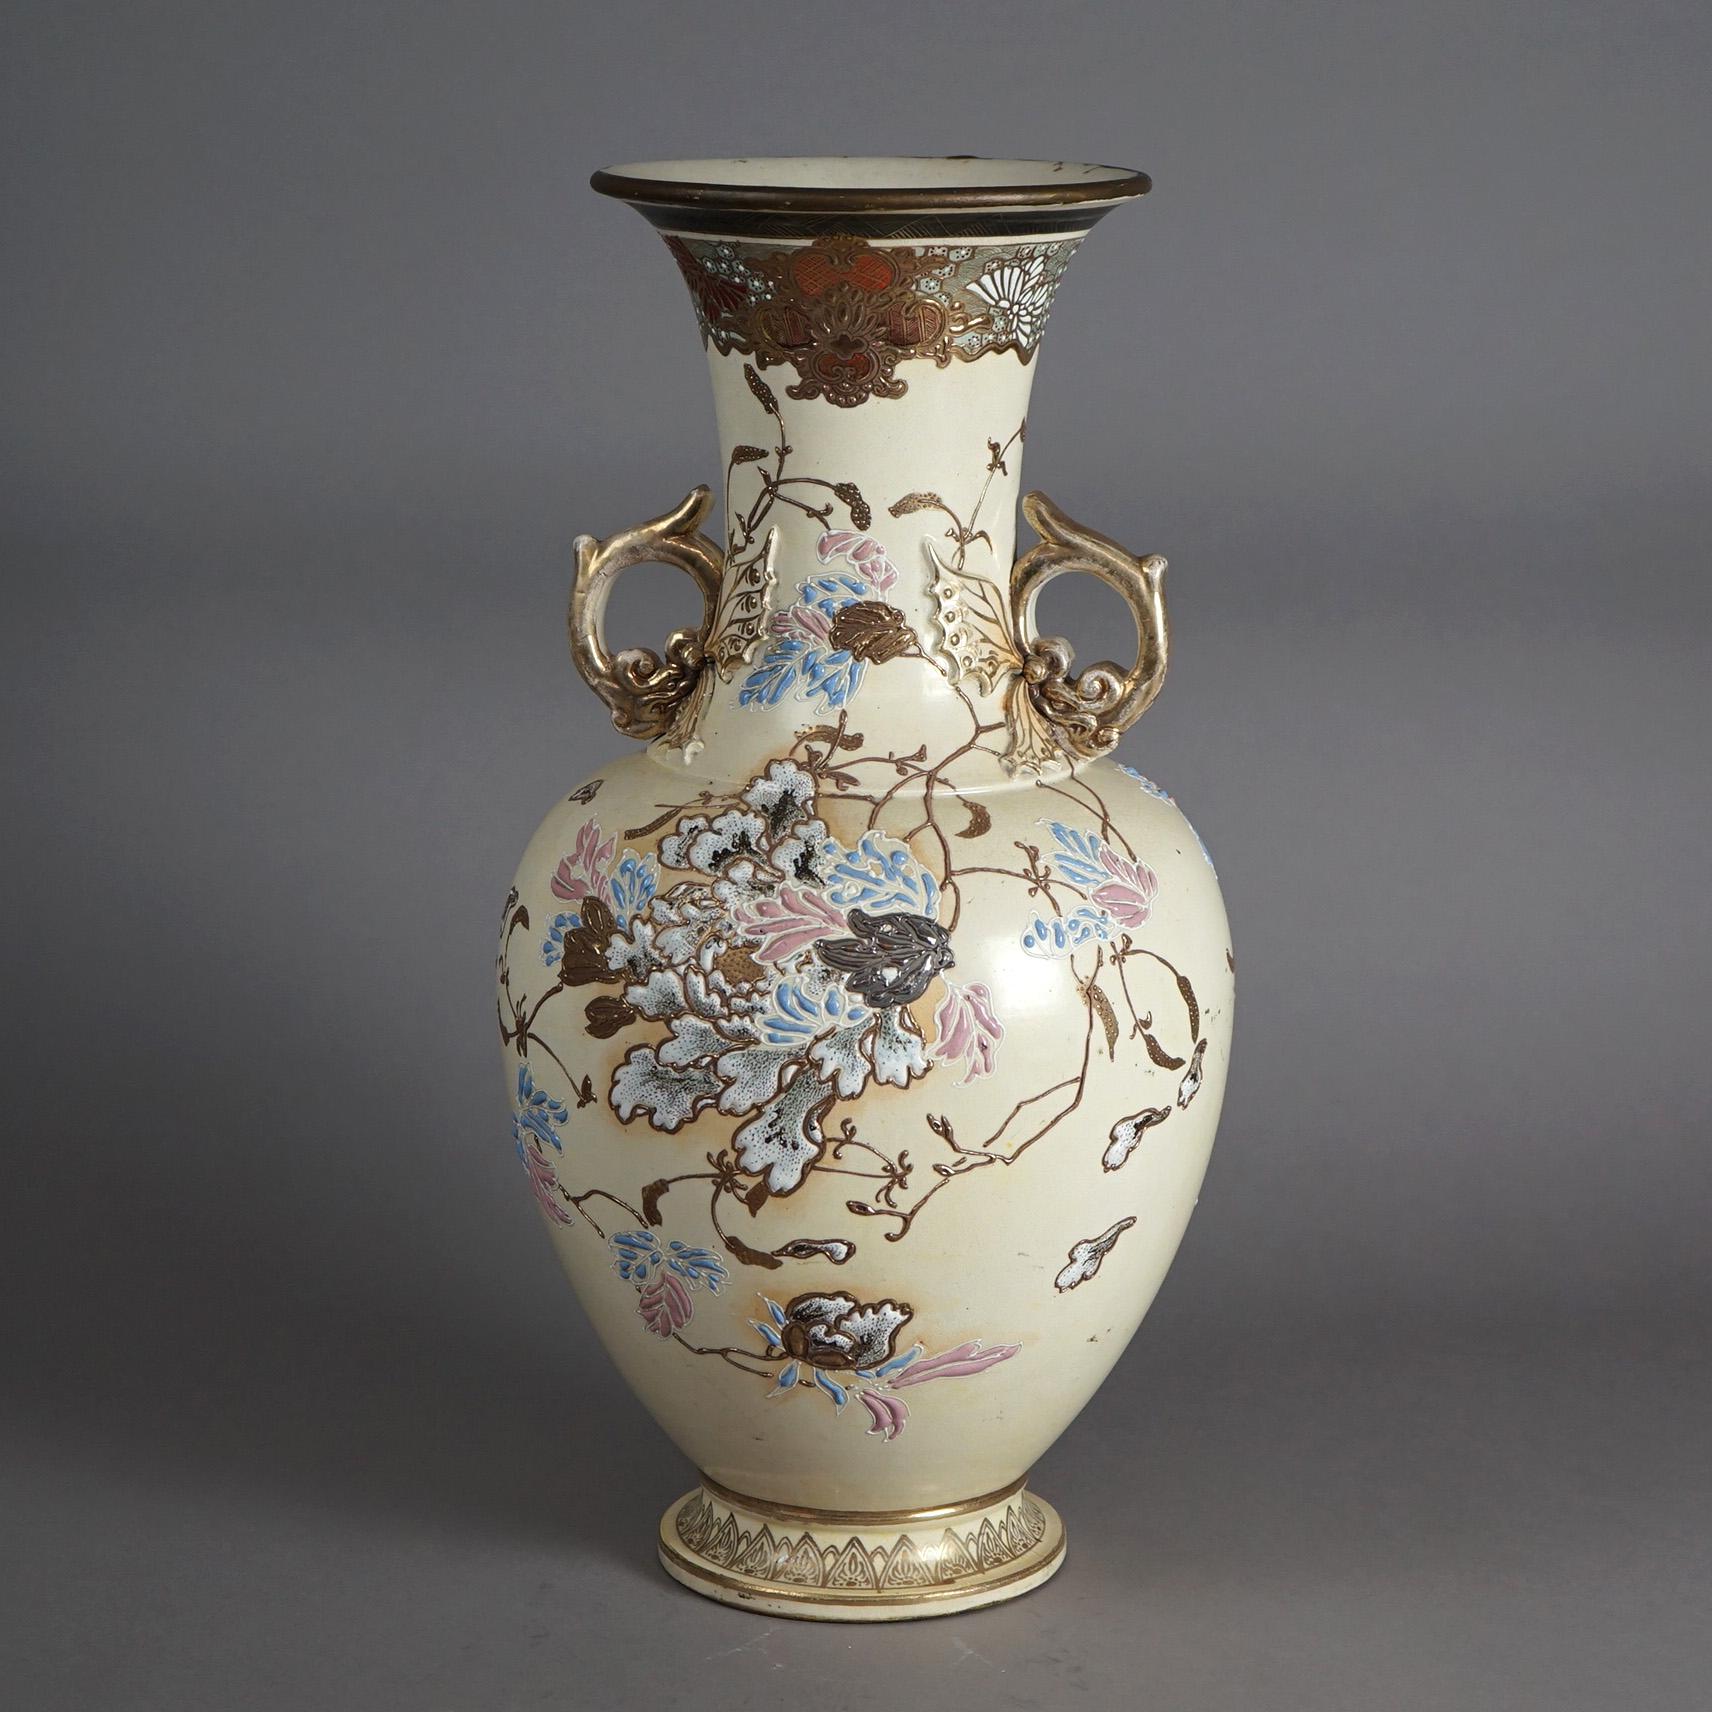 An antique Japanese Meiji vase offers pottery construction  with hand painted floral garden design, double handles and gilt highlights throughout, signed on base as photographed, c1900

Measures- 20.5''H x 10.5''W x 10.5''D